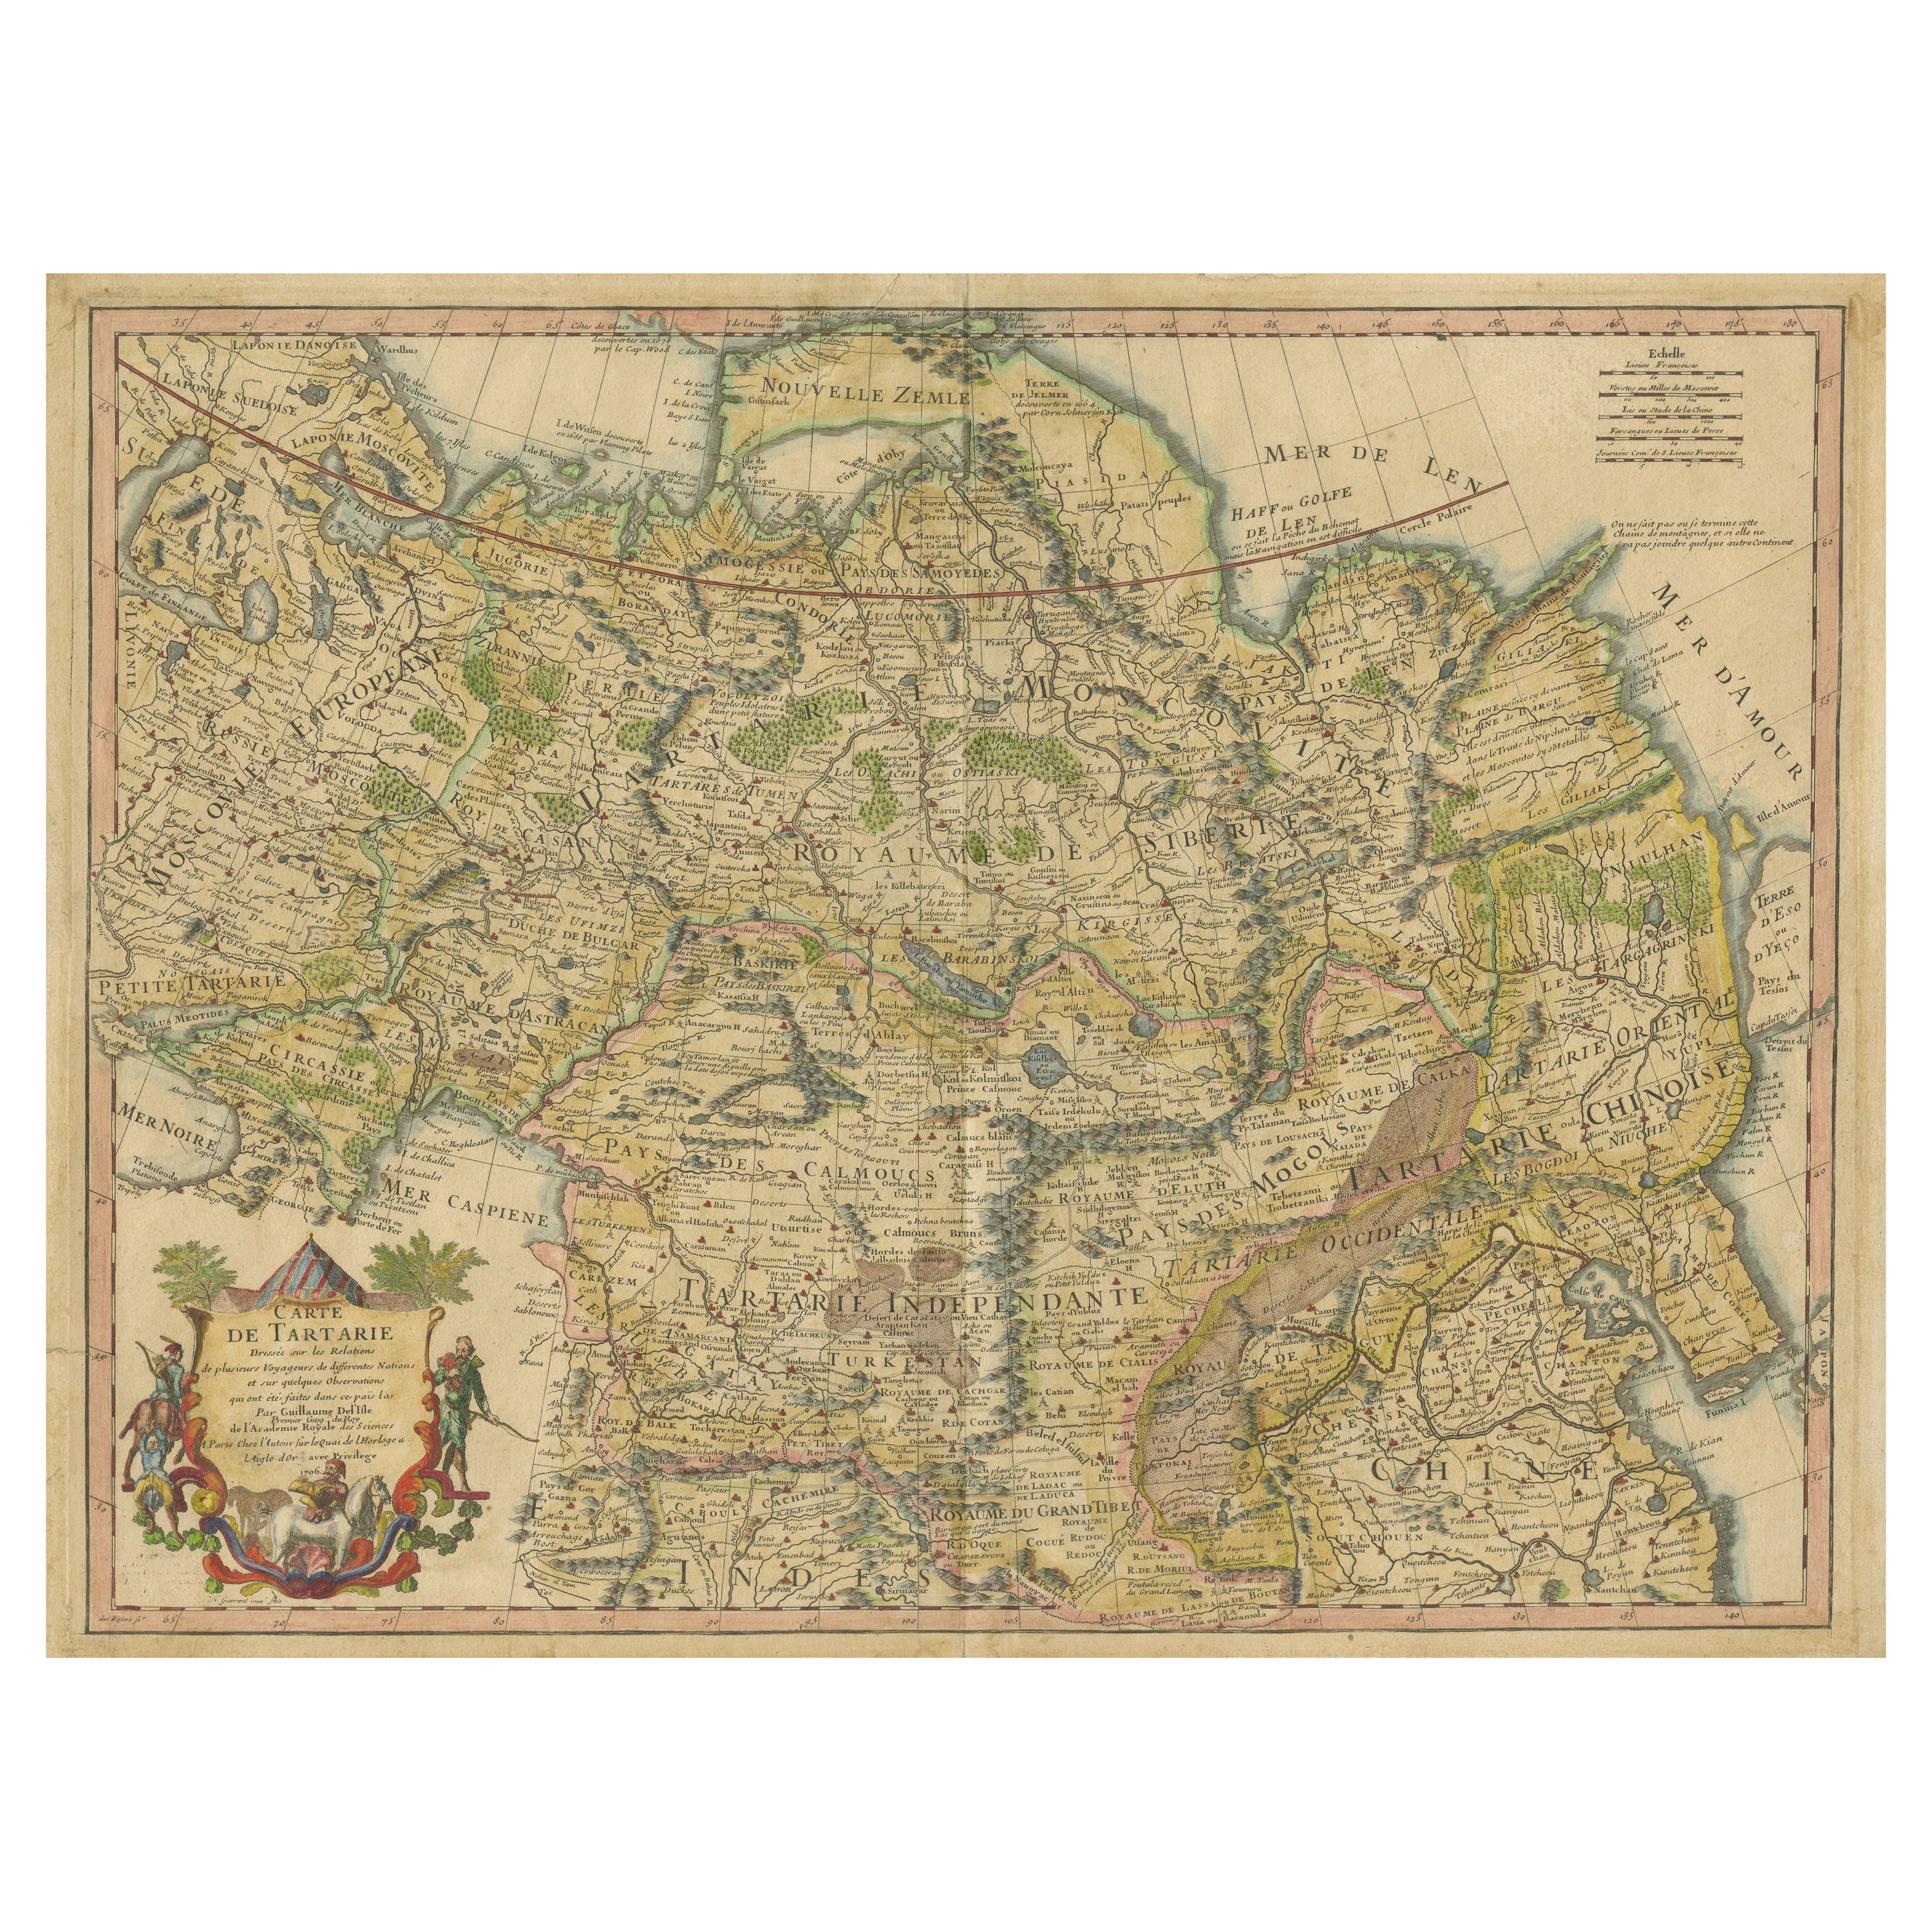 Antique Map of Tartary, Also Showing the Great Wall of China